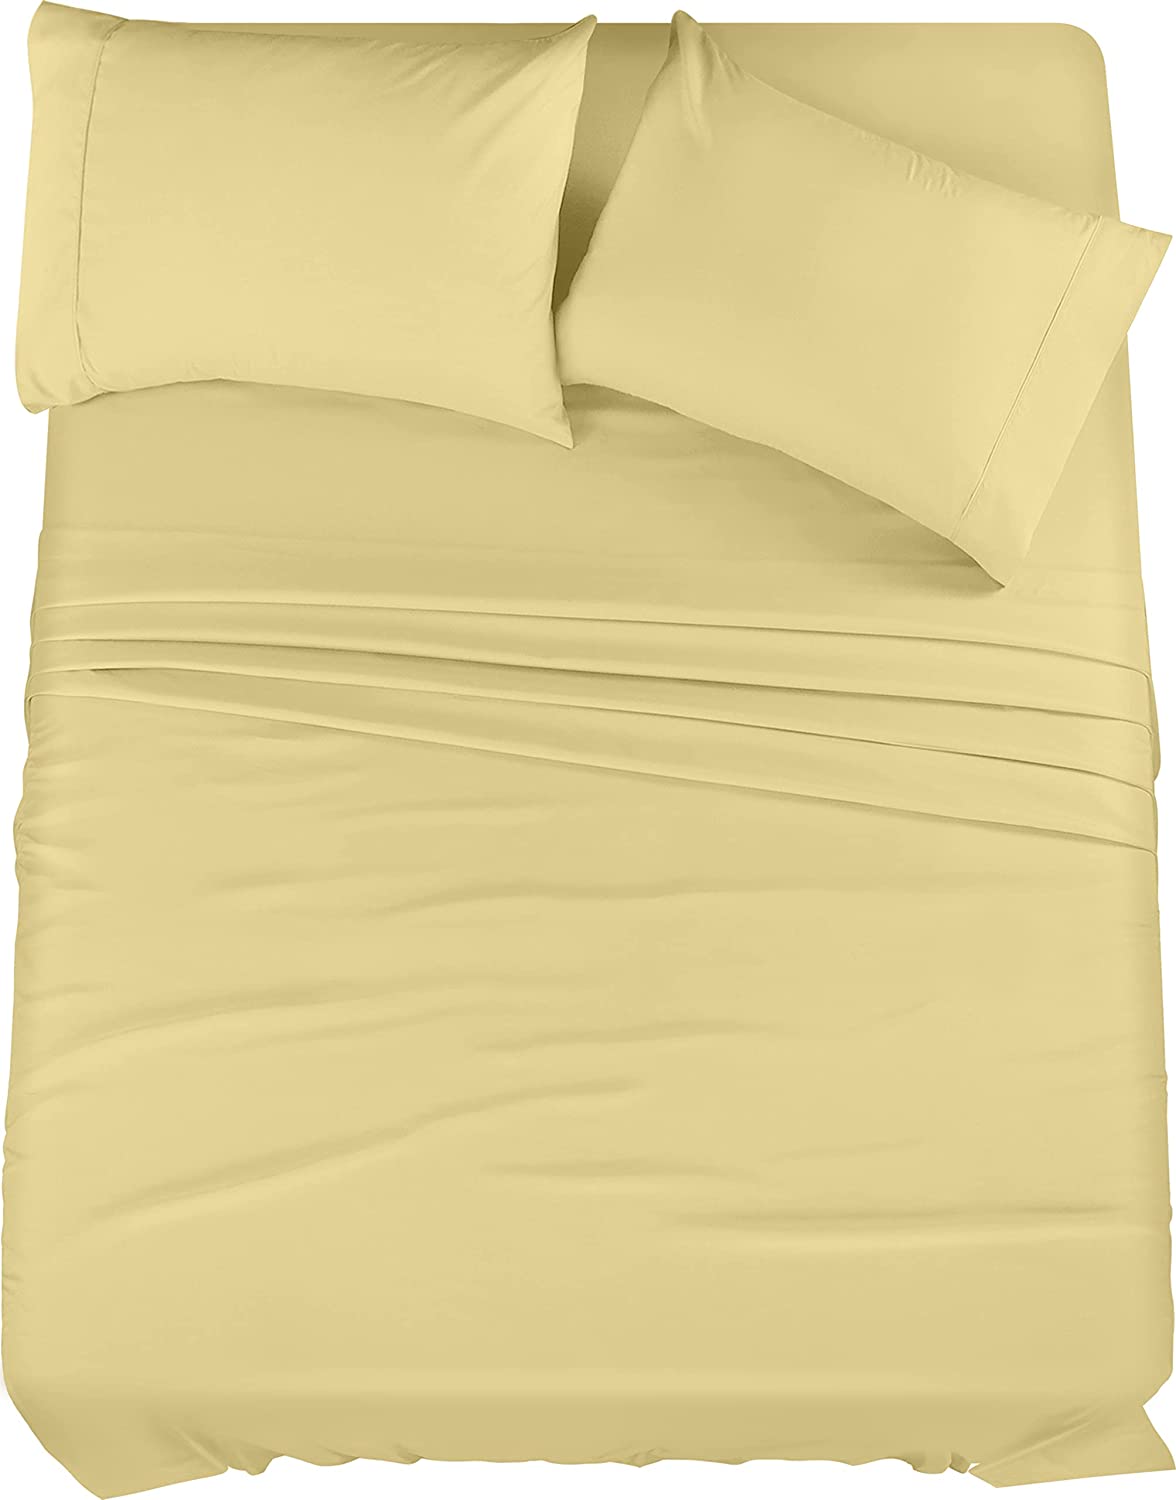 Utopia Bedding Queen Bed Sheets Set - 4 Piece Bedding - Brushed